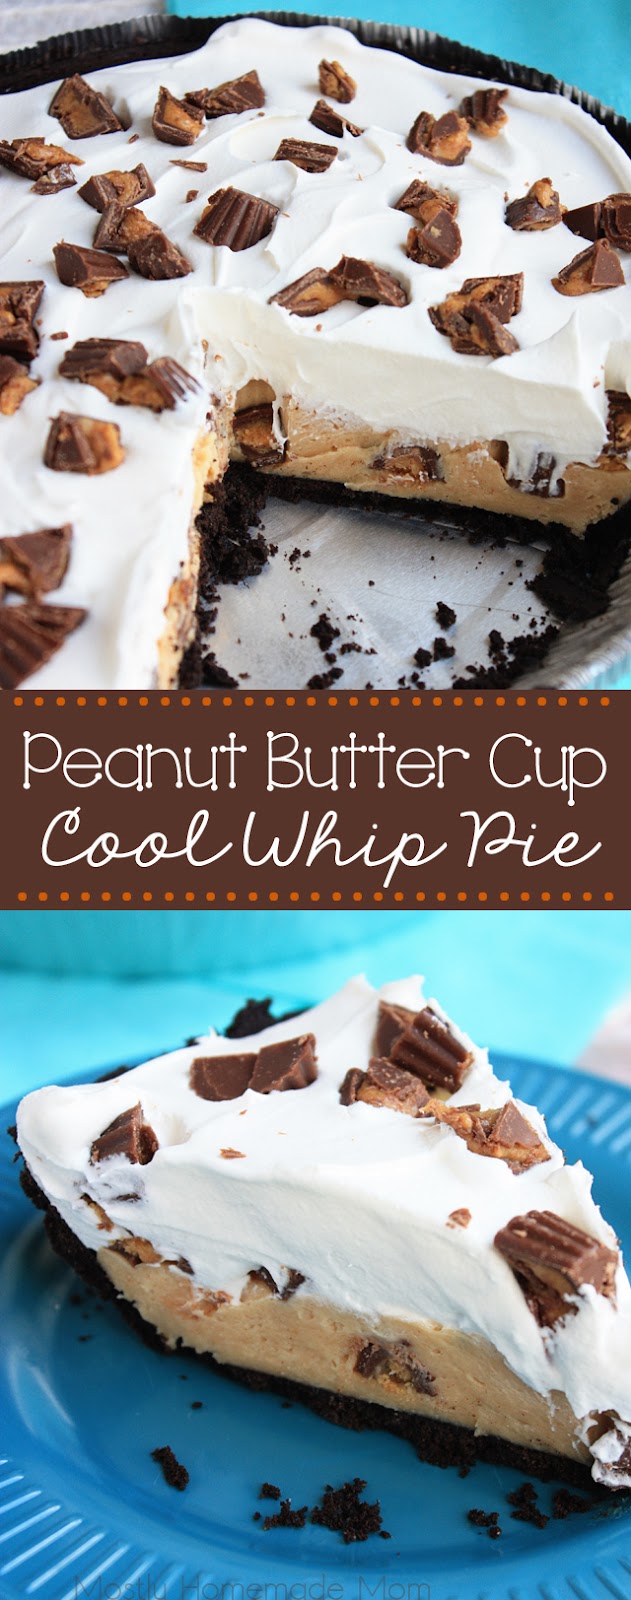 Peanut Butter Cup Cool Whip Pie | Mostly Homemade Mom